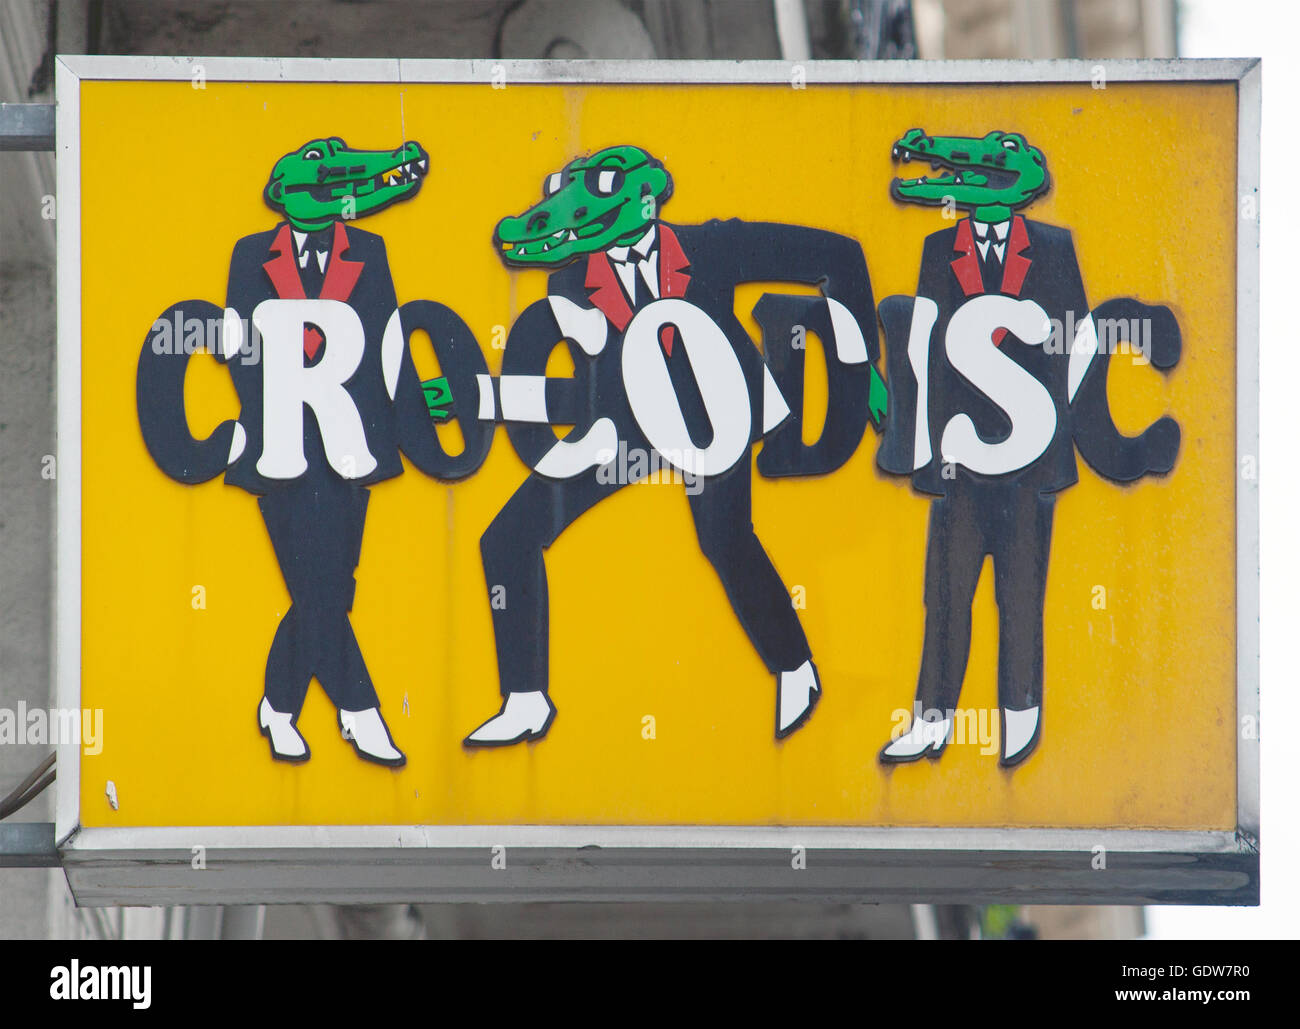 Dancing hipster crocodile sign at a record store in Paris France Stock Photo